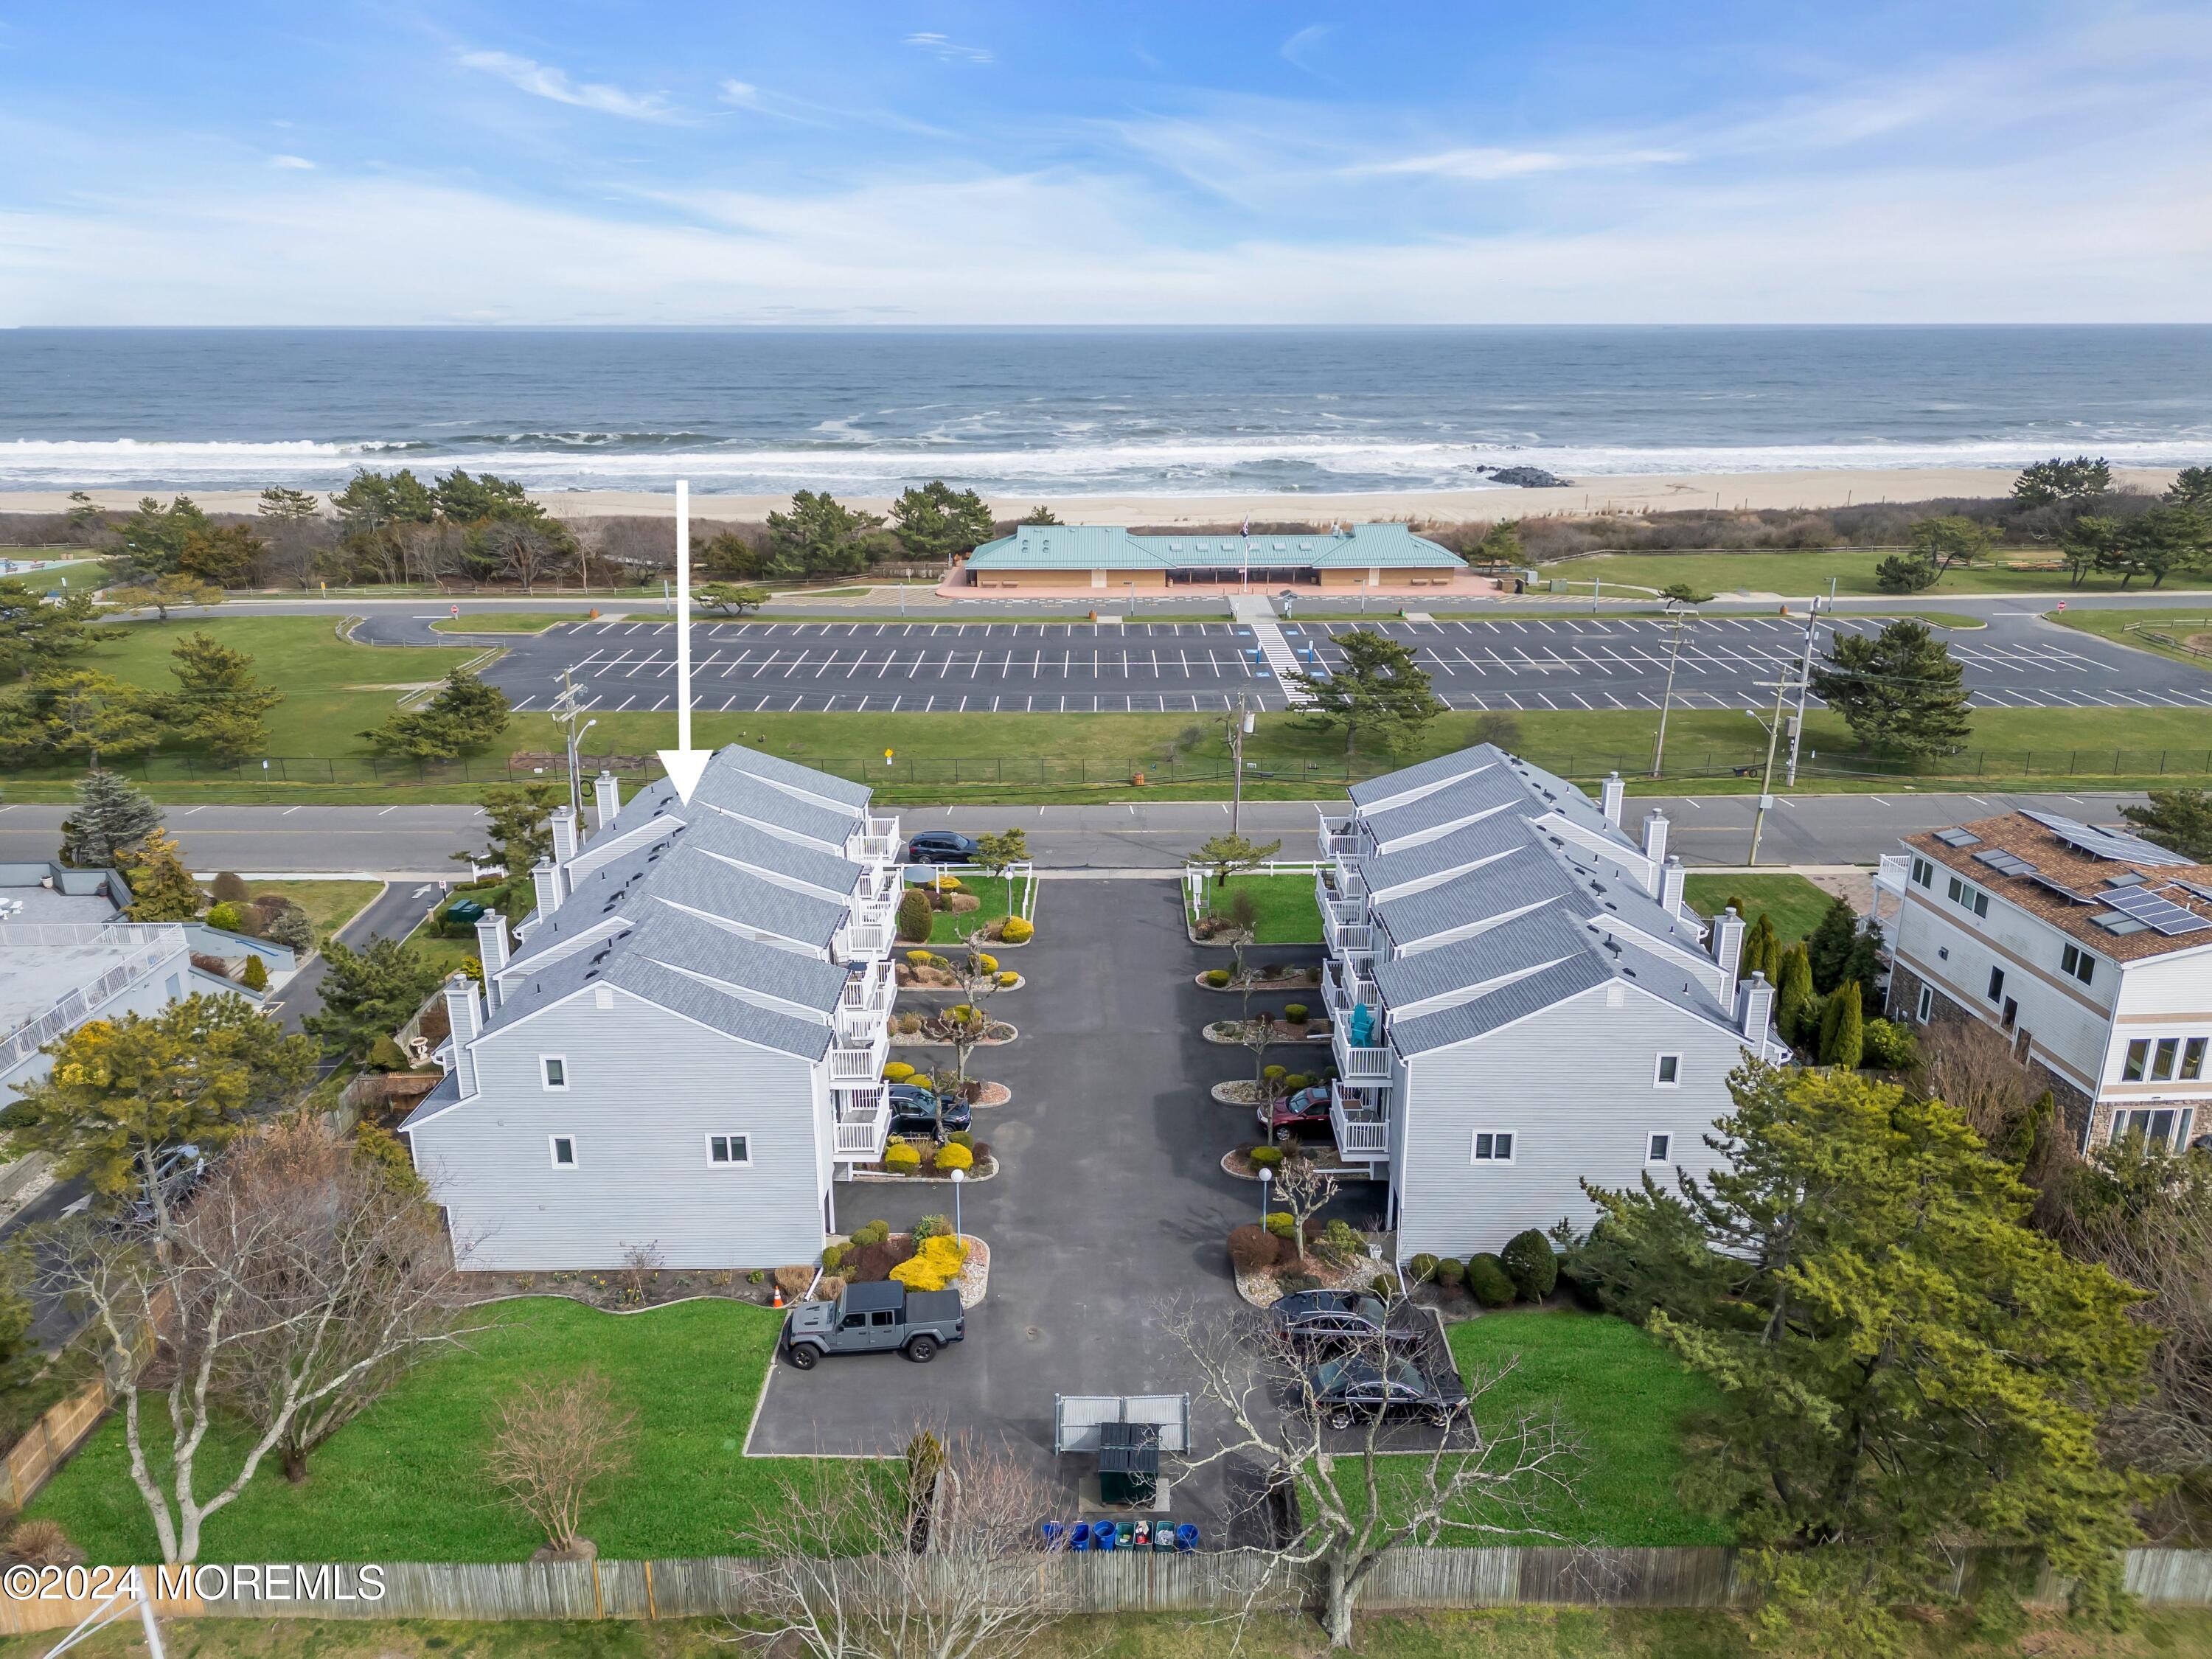 an aerial view of house with ocean view